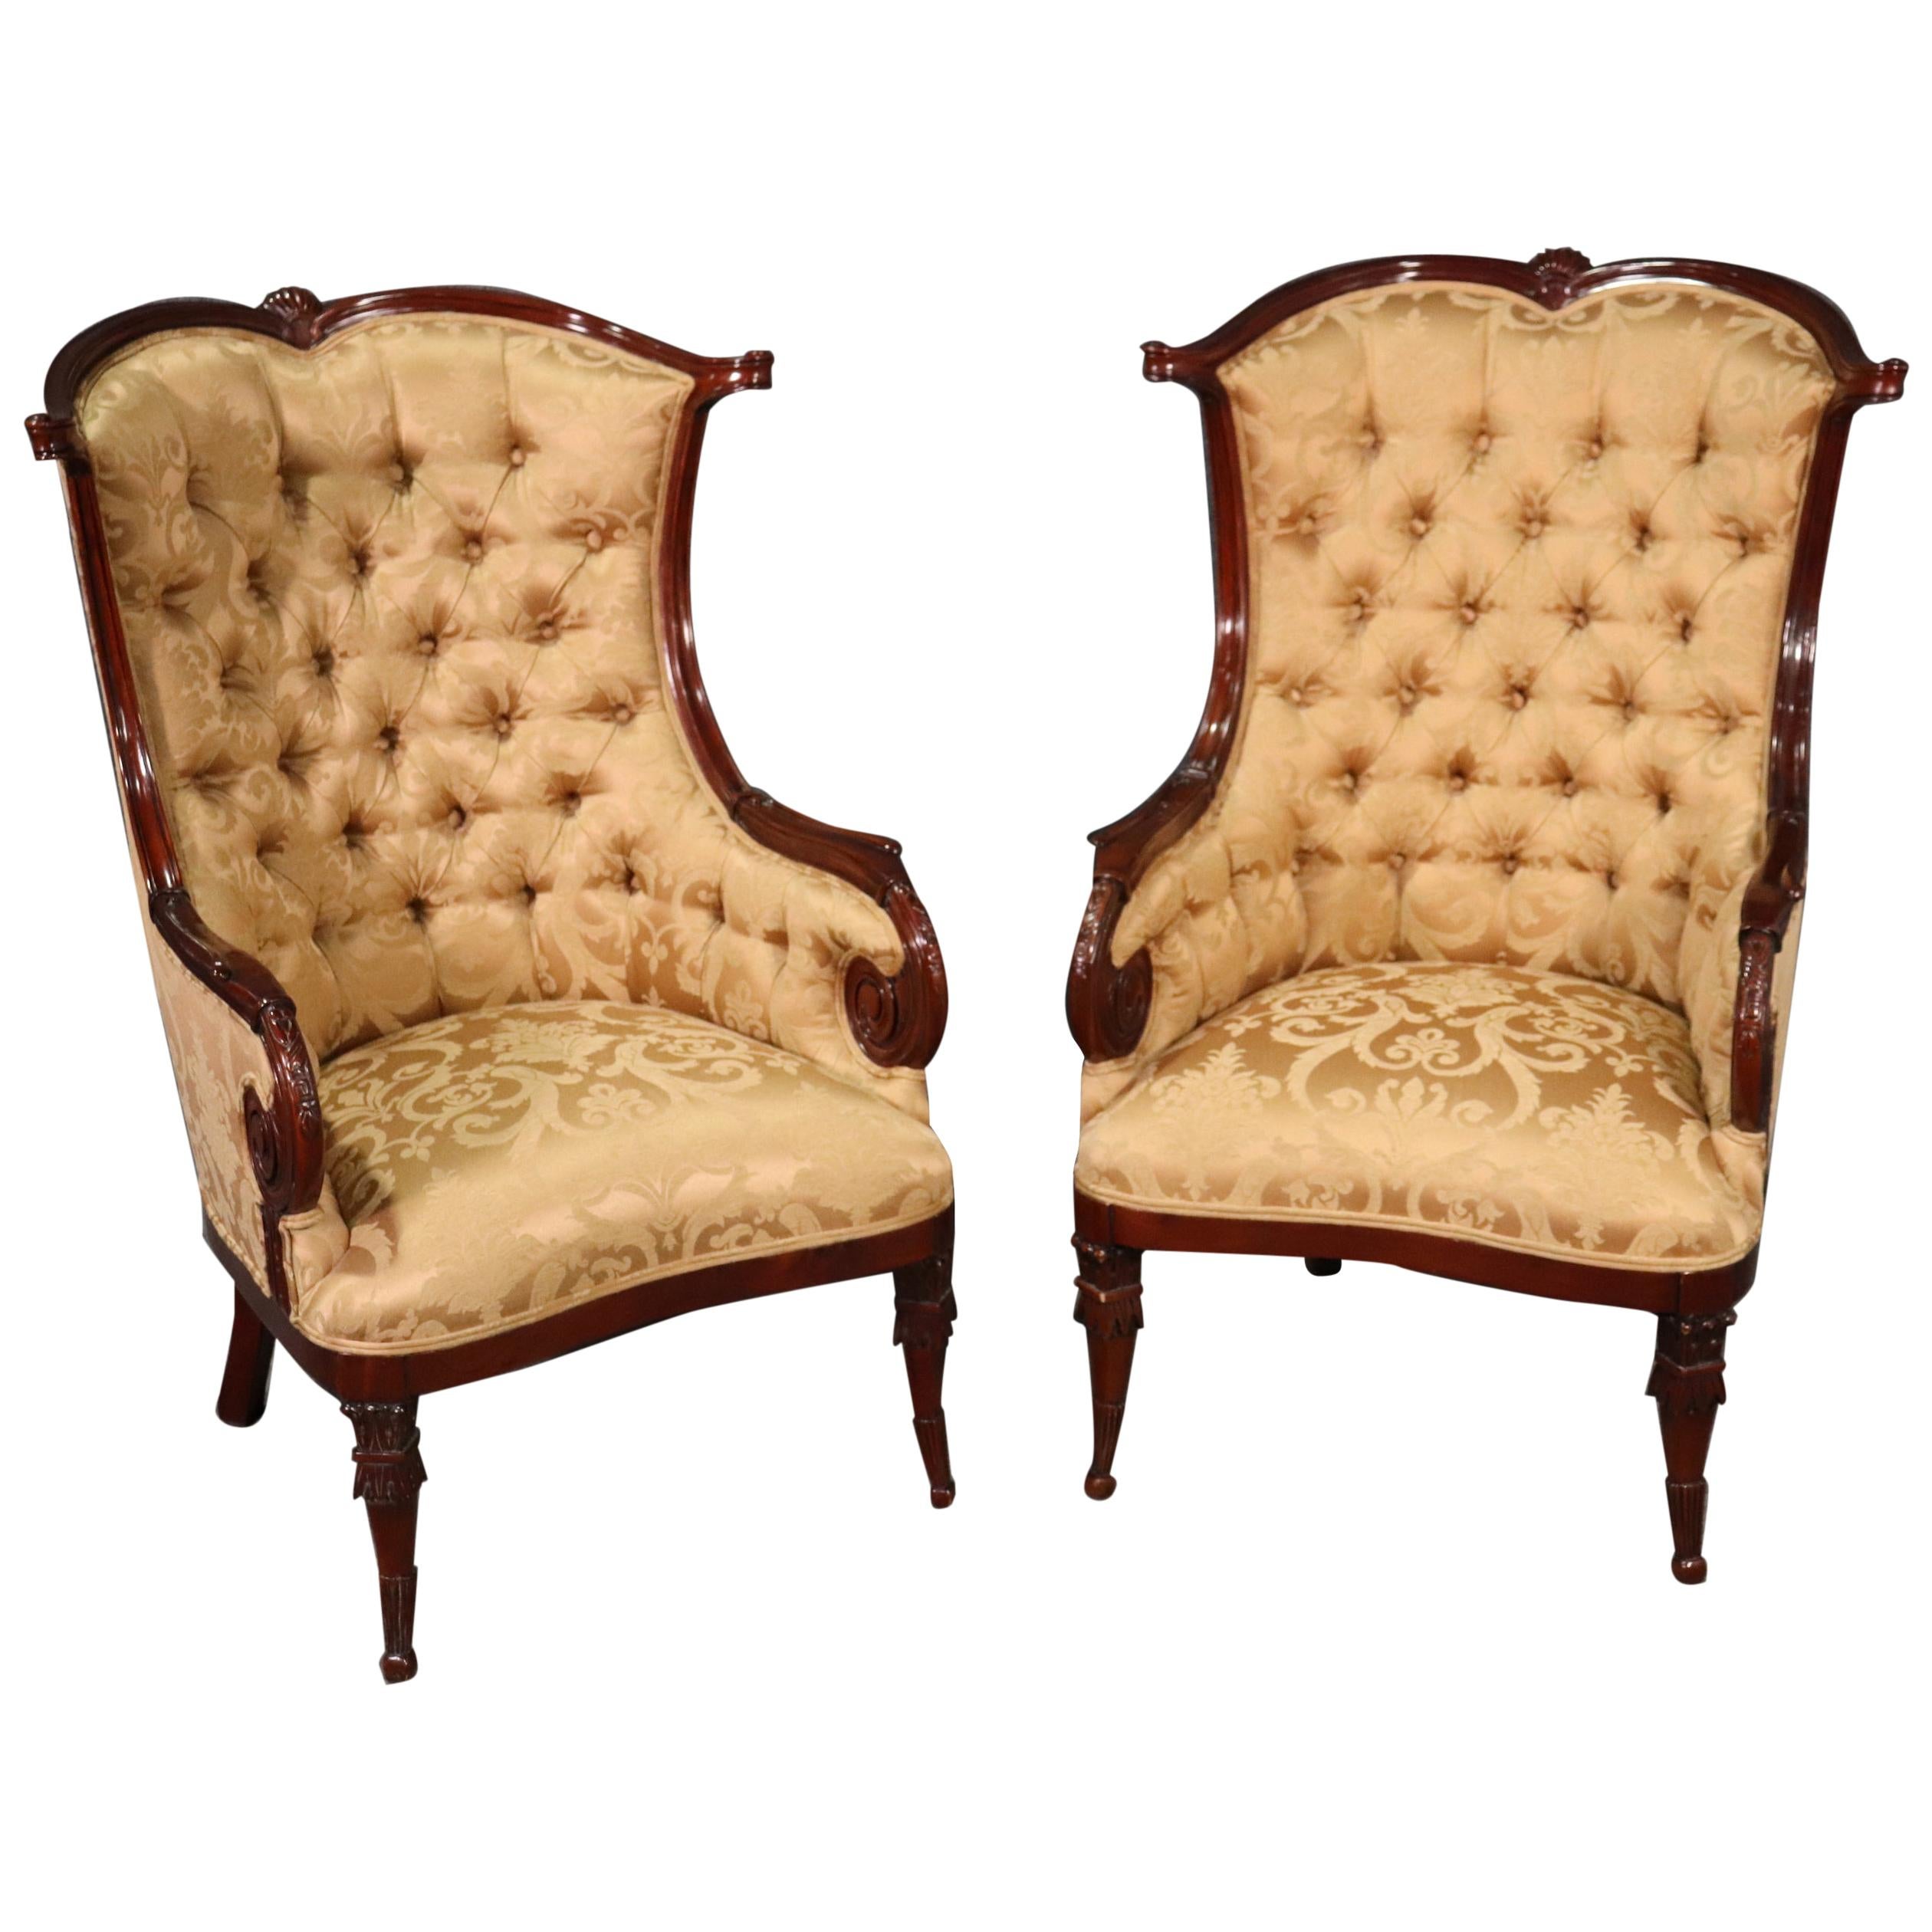 Pair of Large English Regency Style Carved Mahogany Fireside Wing Chairs